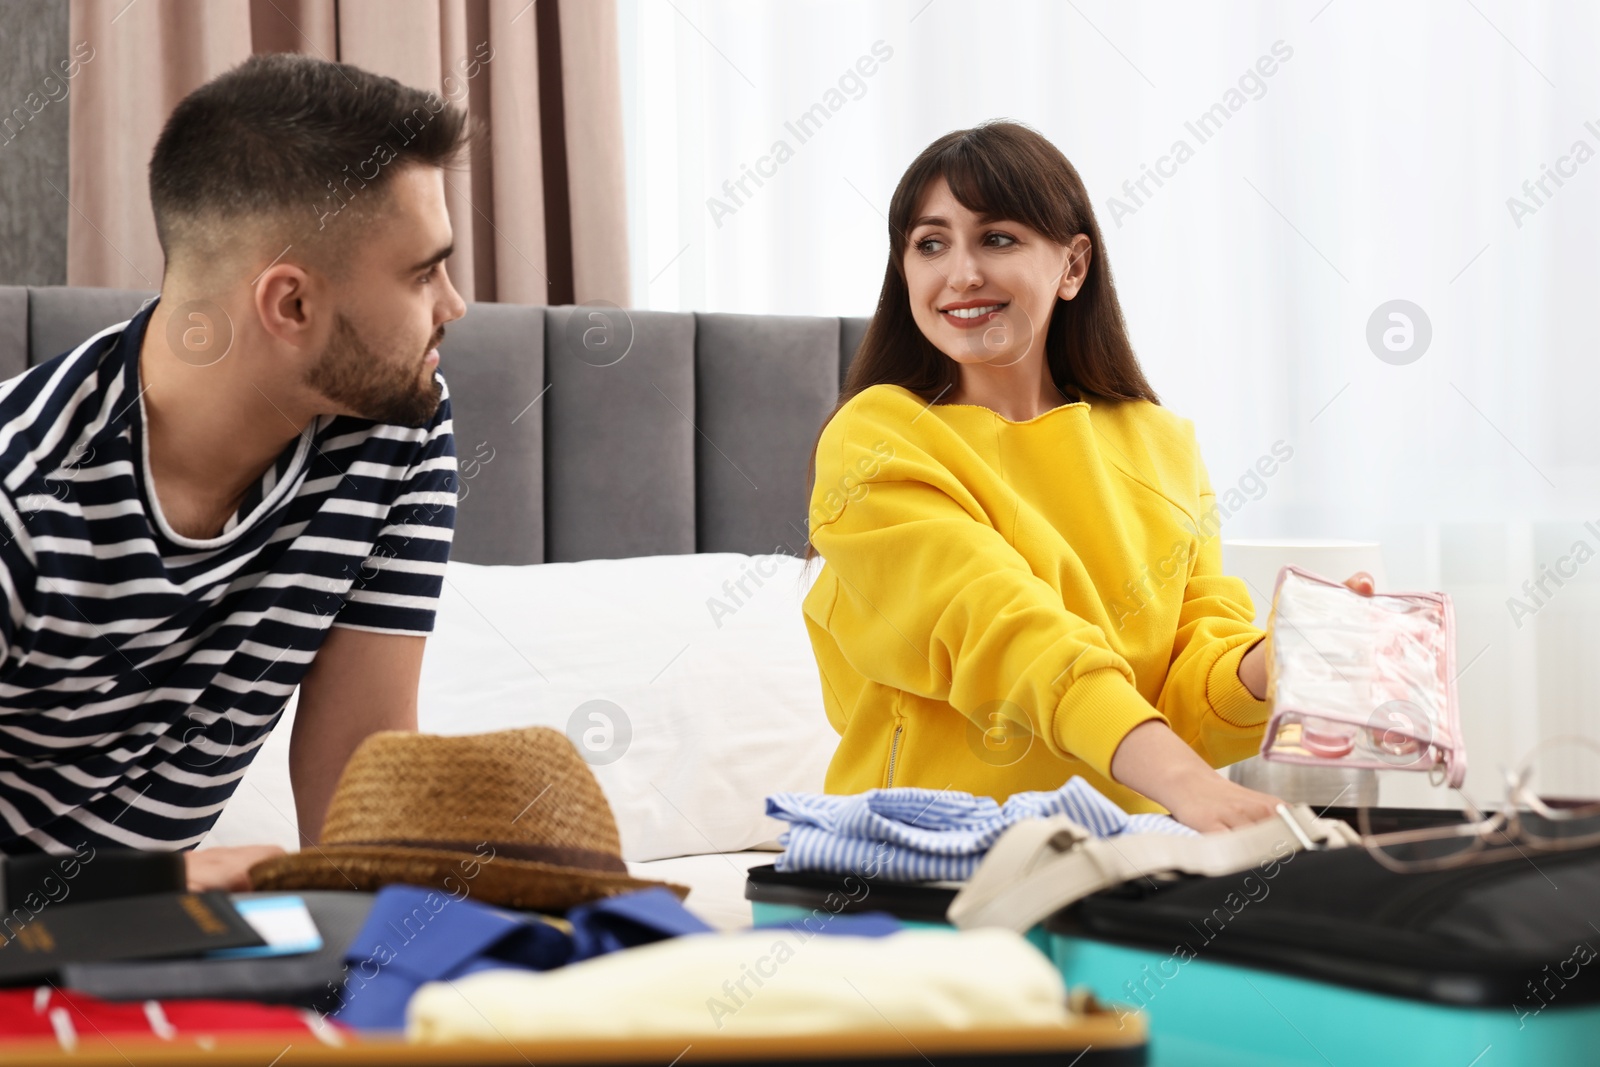 Photo of Couple packing suitcases for trip in bedroom